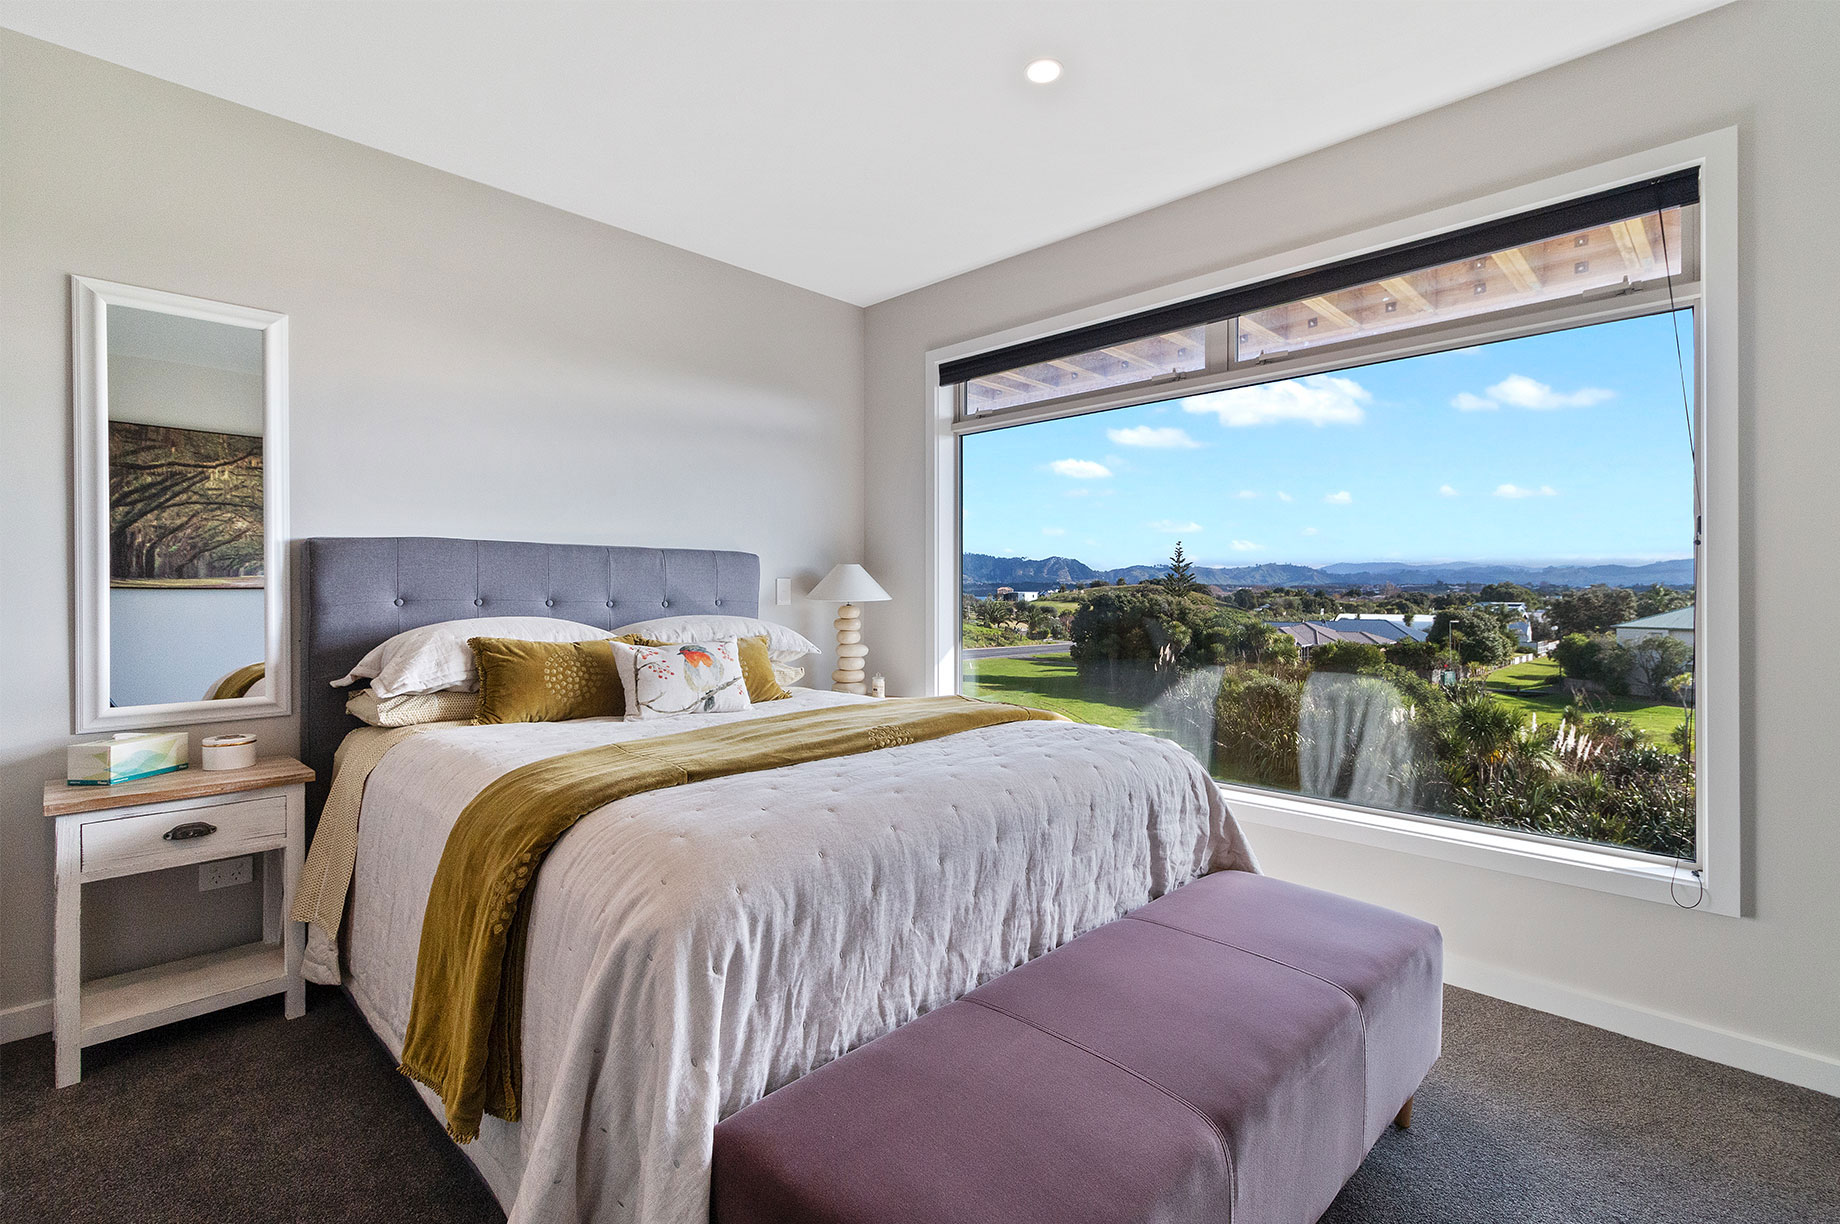 Bedroom with a large window overlooking hills